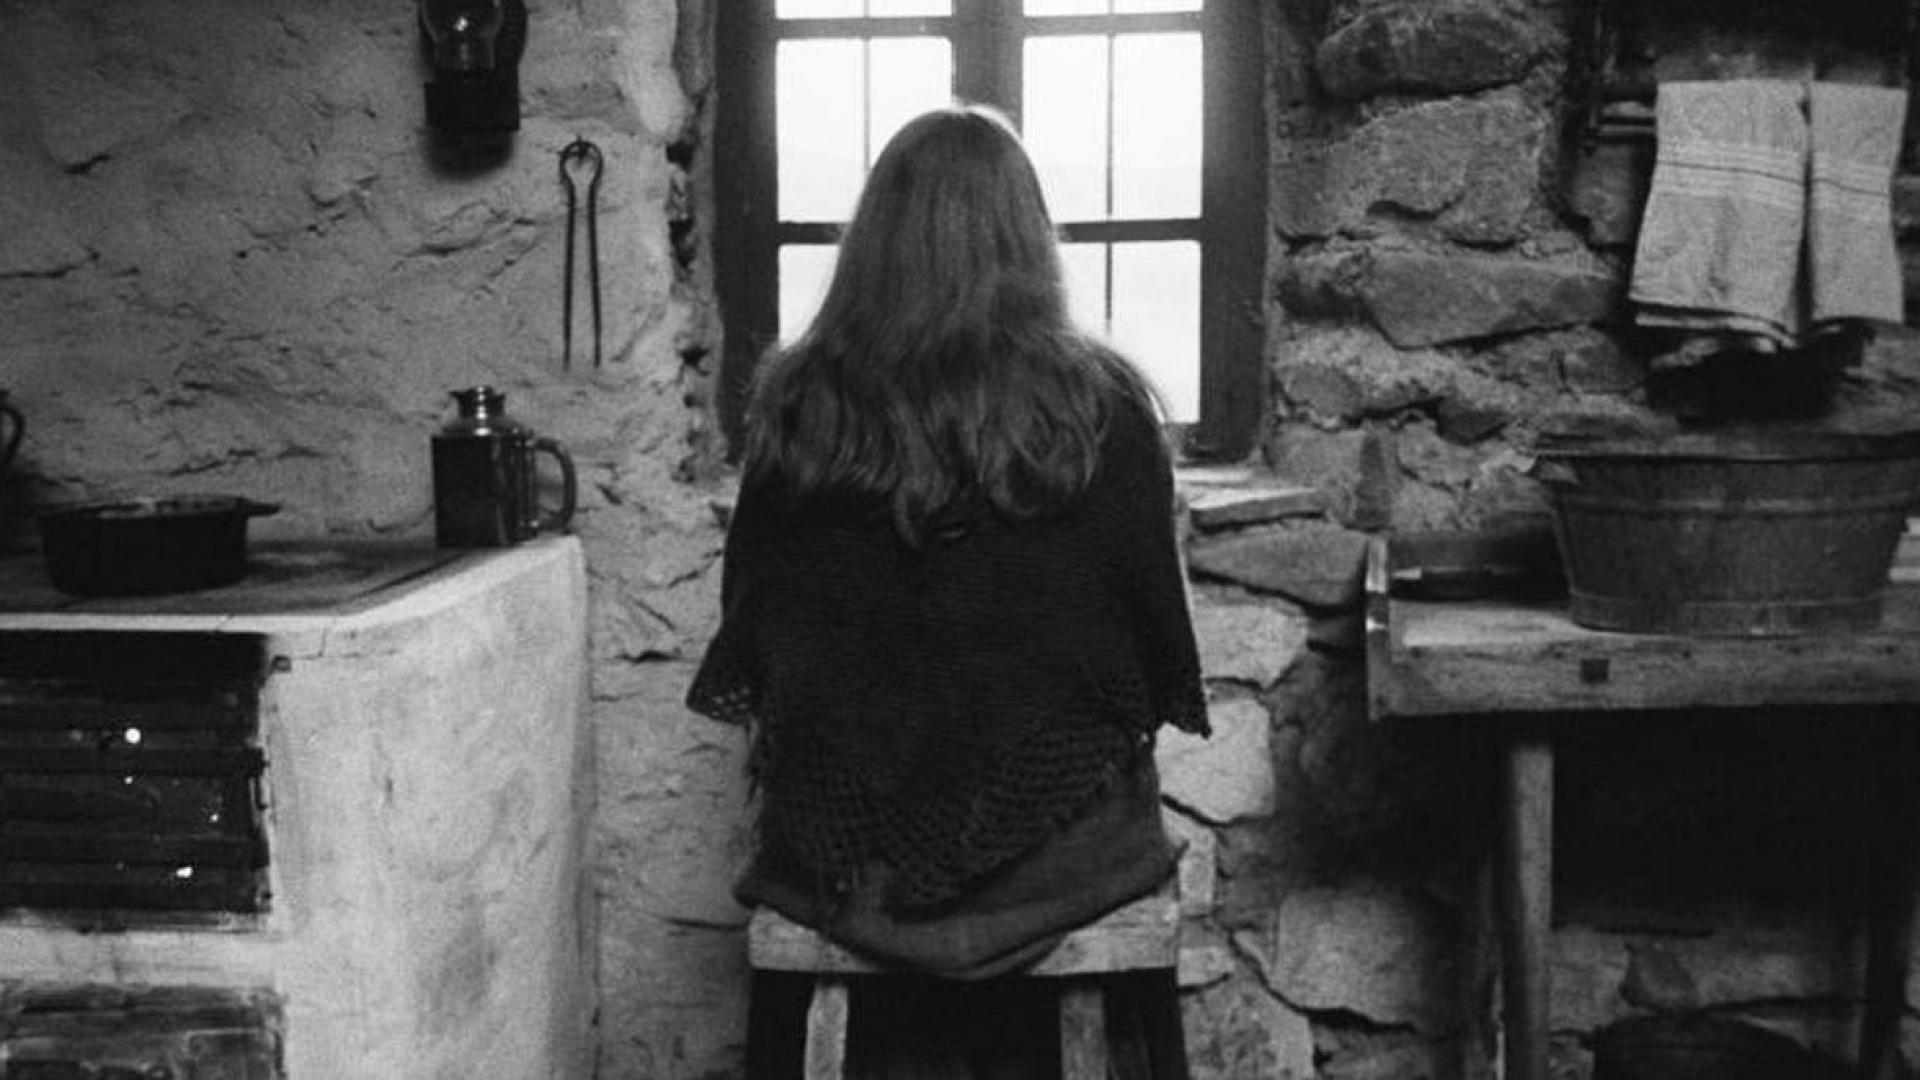 Indoors kitchen grayscale windows the turin horse wallpapers